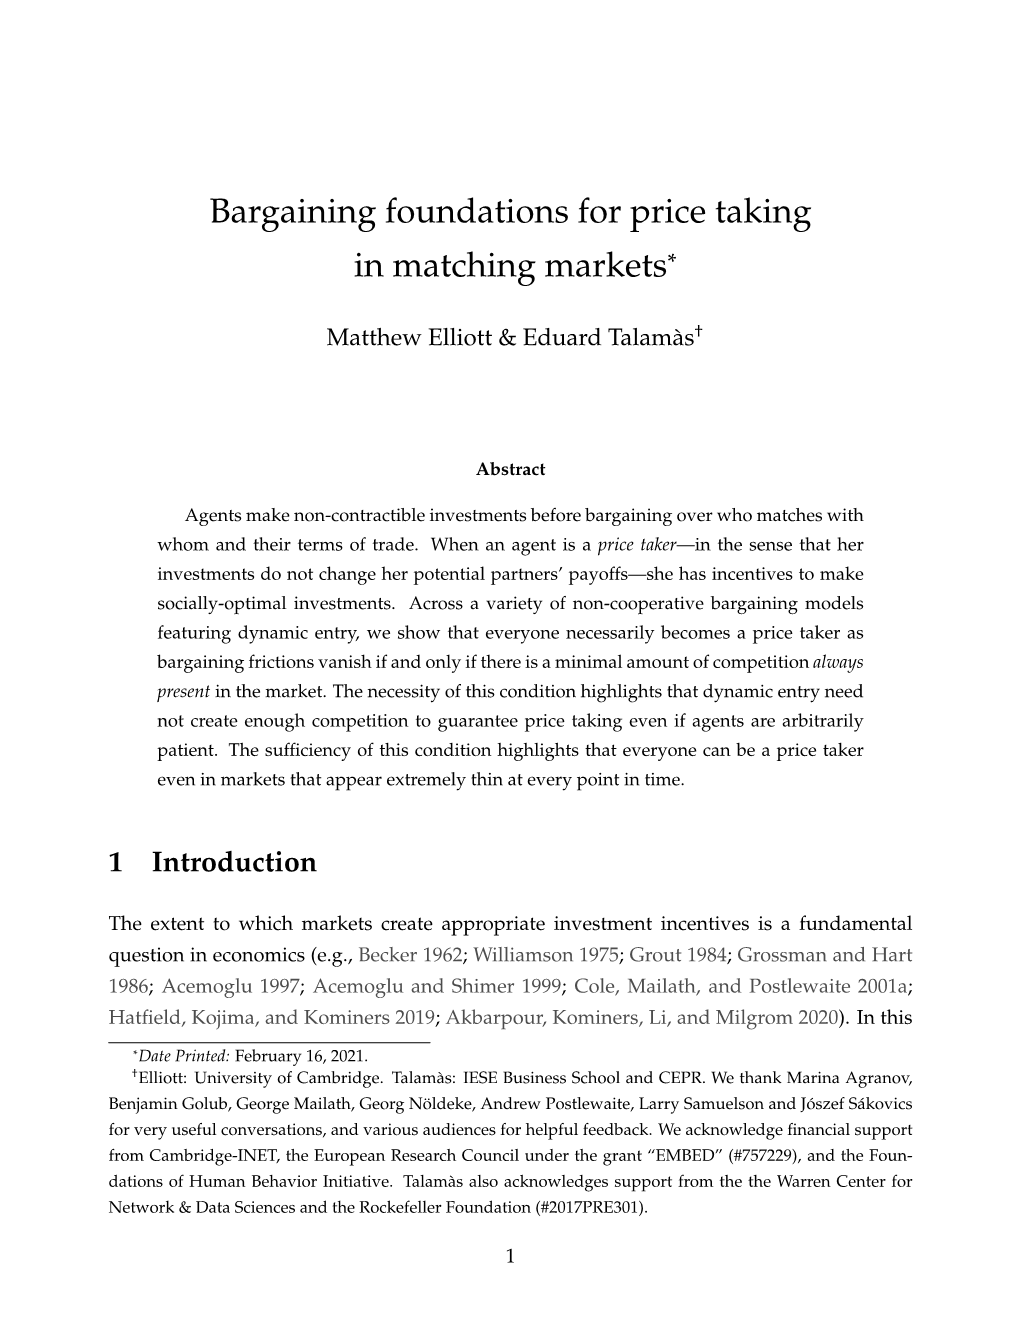 Bargaining Foundations for Price Taking in Matching Markets*